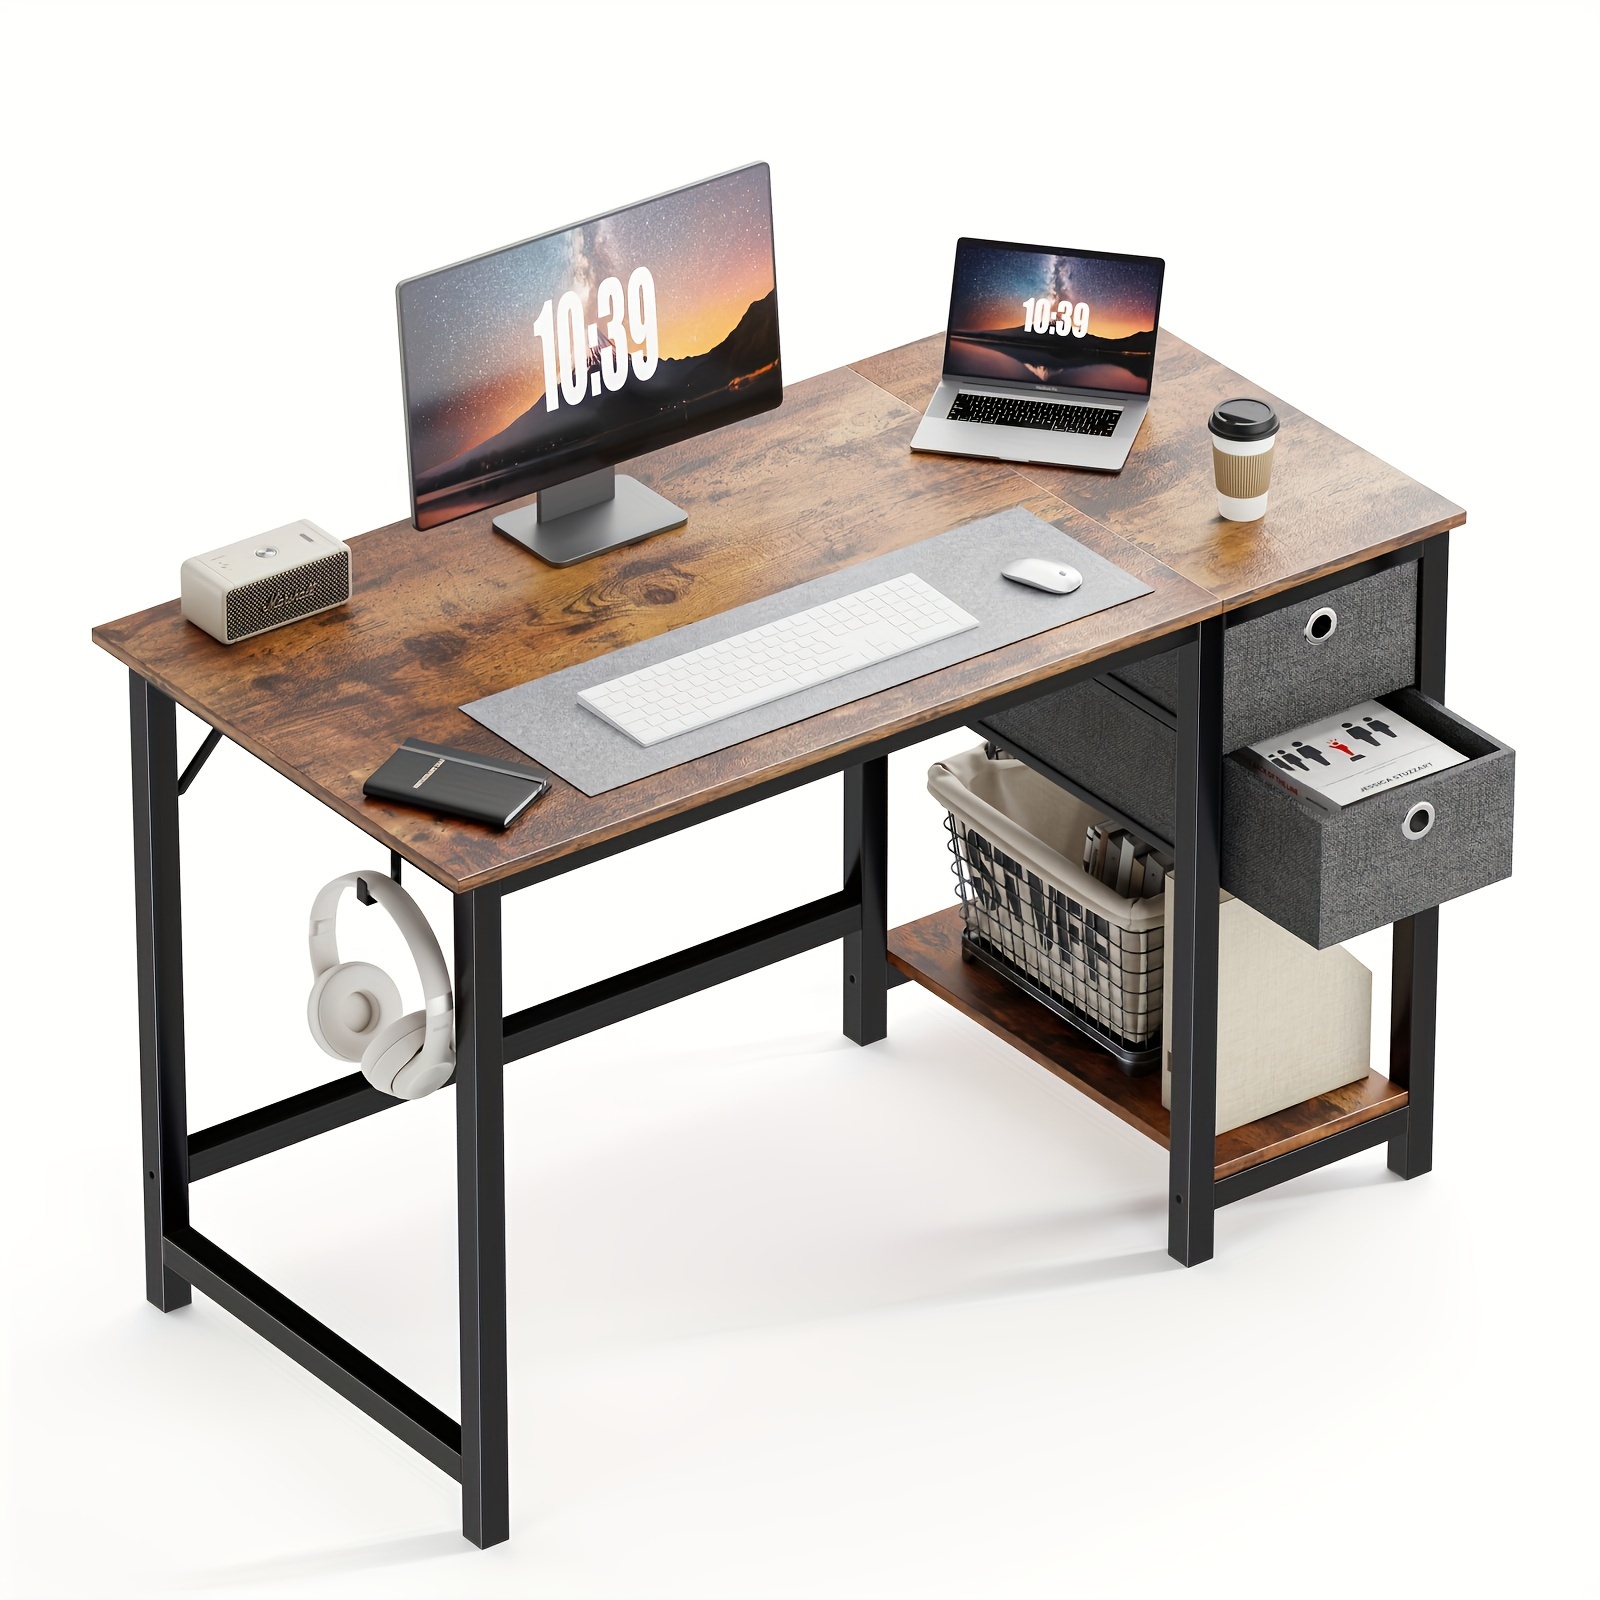 

47 Inch Small Desk With Drawers 2-tier Storage Drawers & Shelf Simple Modern Wood Table For Office, Outdoor Recreation, Camping, Hiking